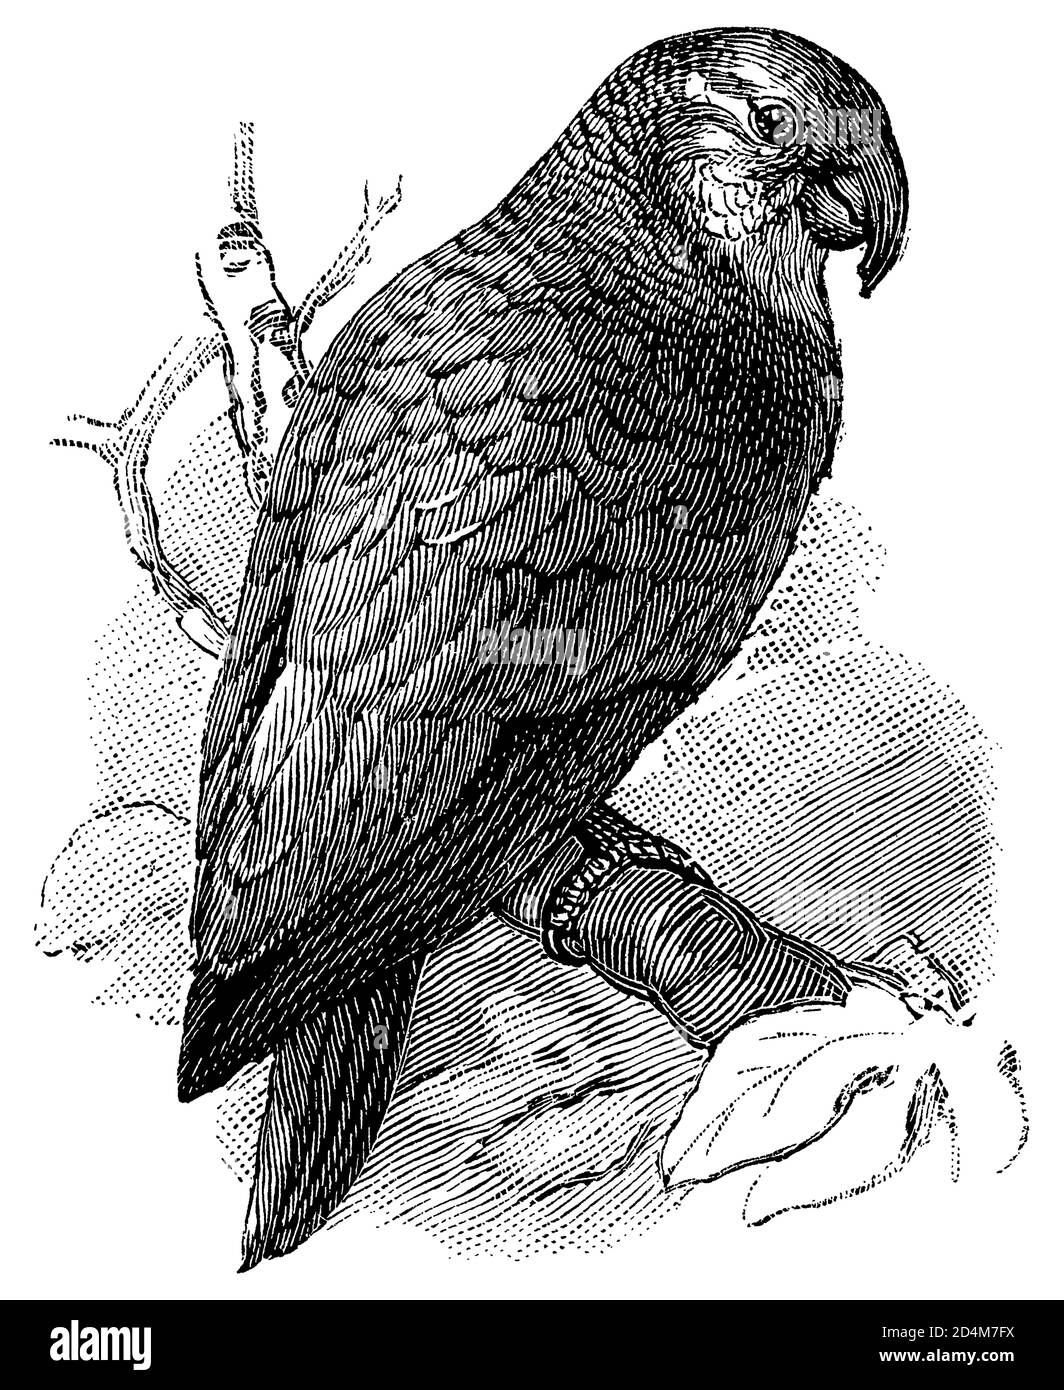 Antique illustration of an Amazon parrot (isolated on white). Published in Systematischer Bilder-Atlas zum Conversations-Lexikon Stock Photo